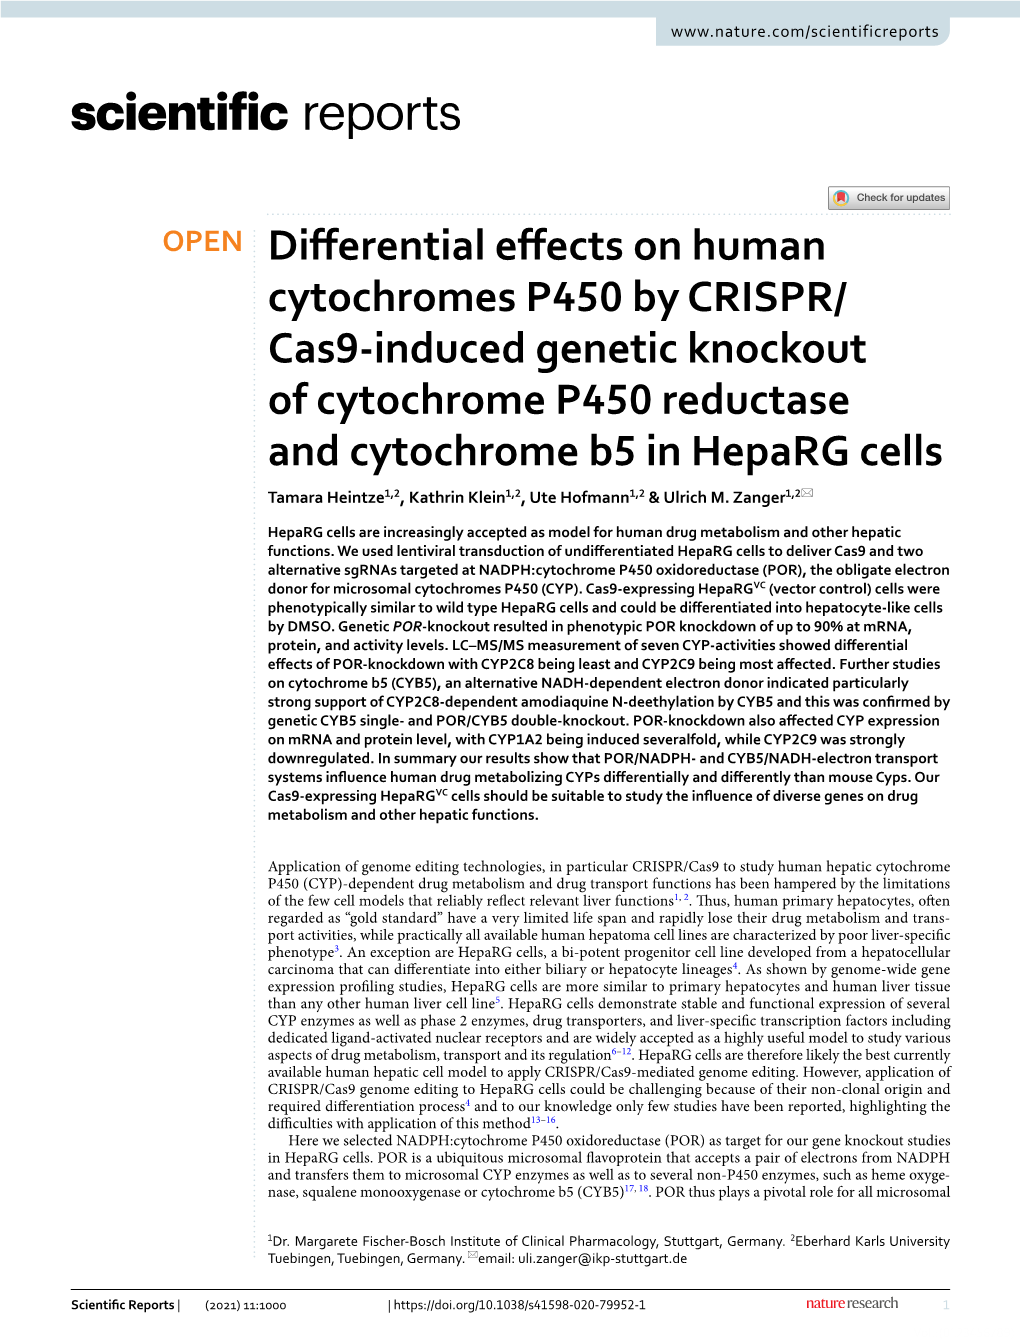 Differential Effects on Human Cytochromes P450 By